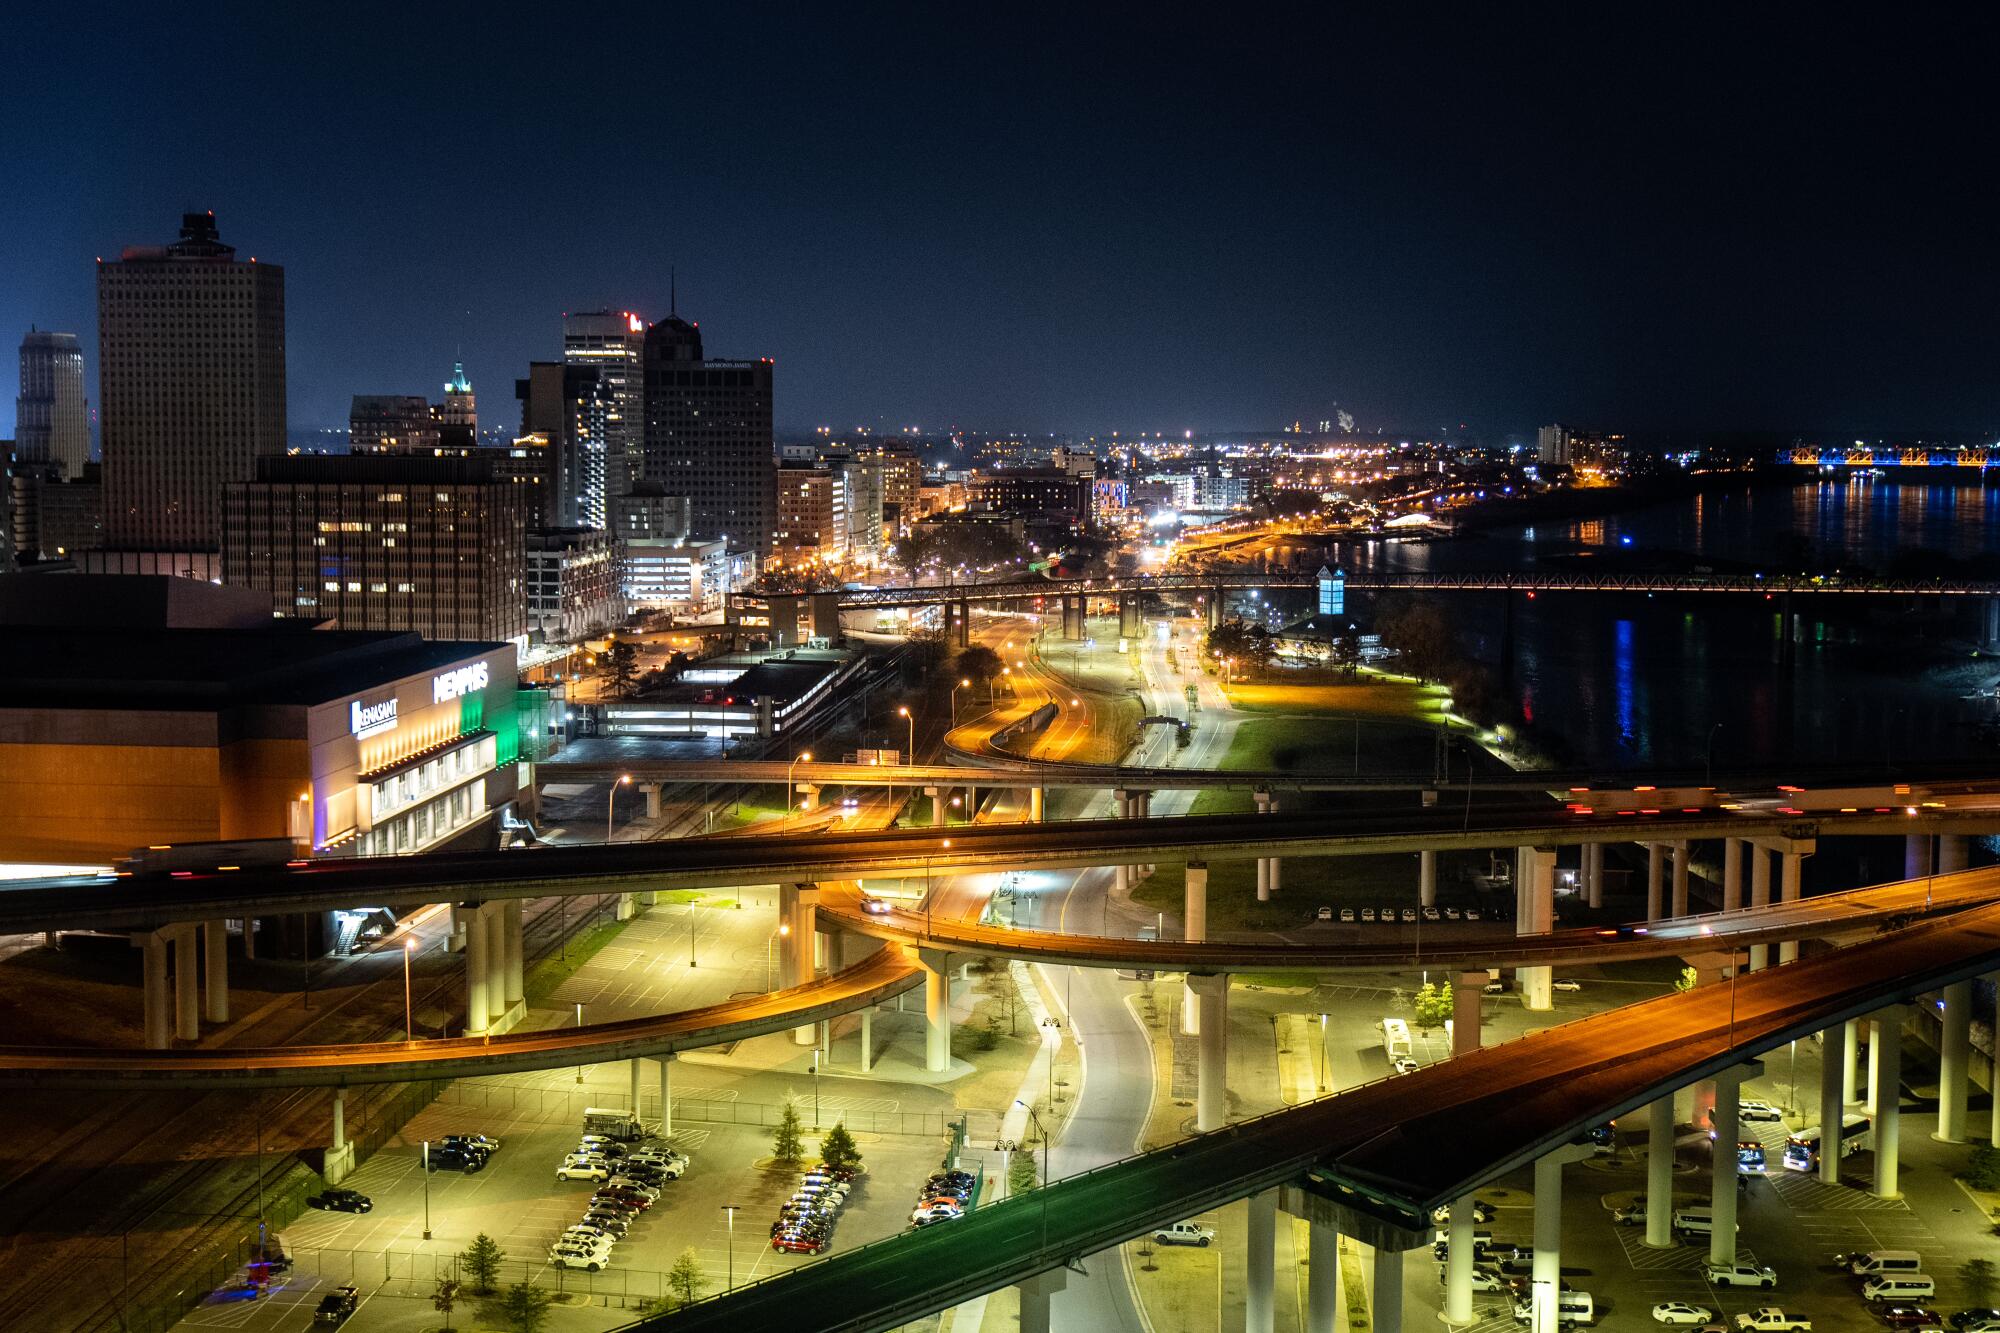 A night view of Memphis.